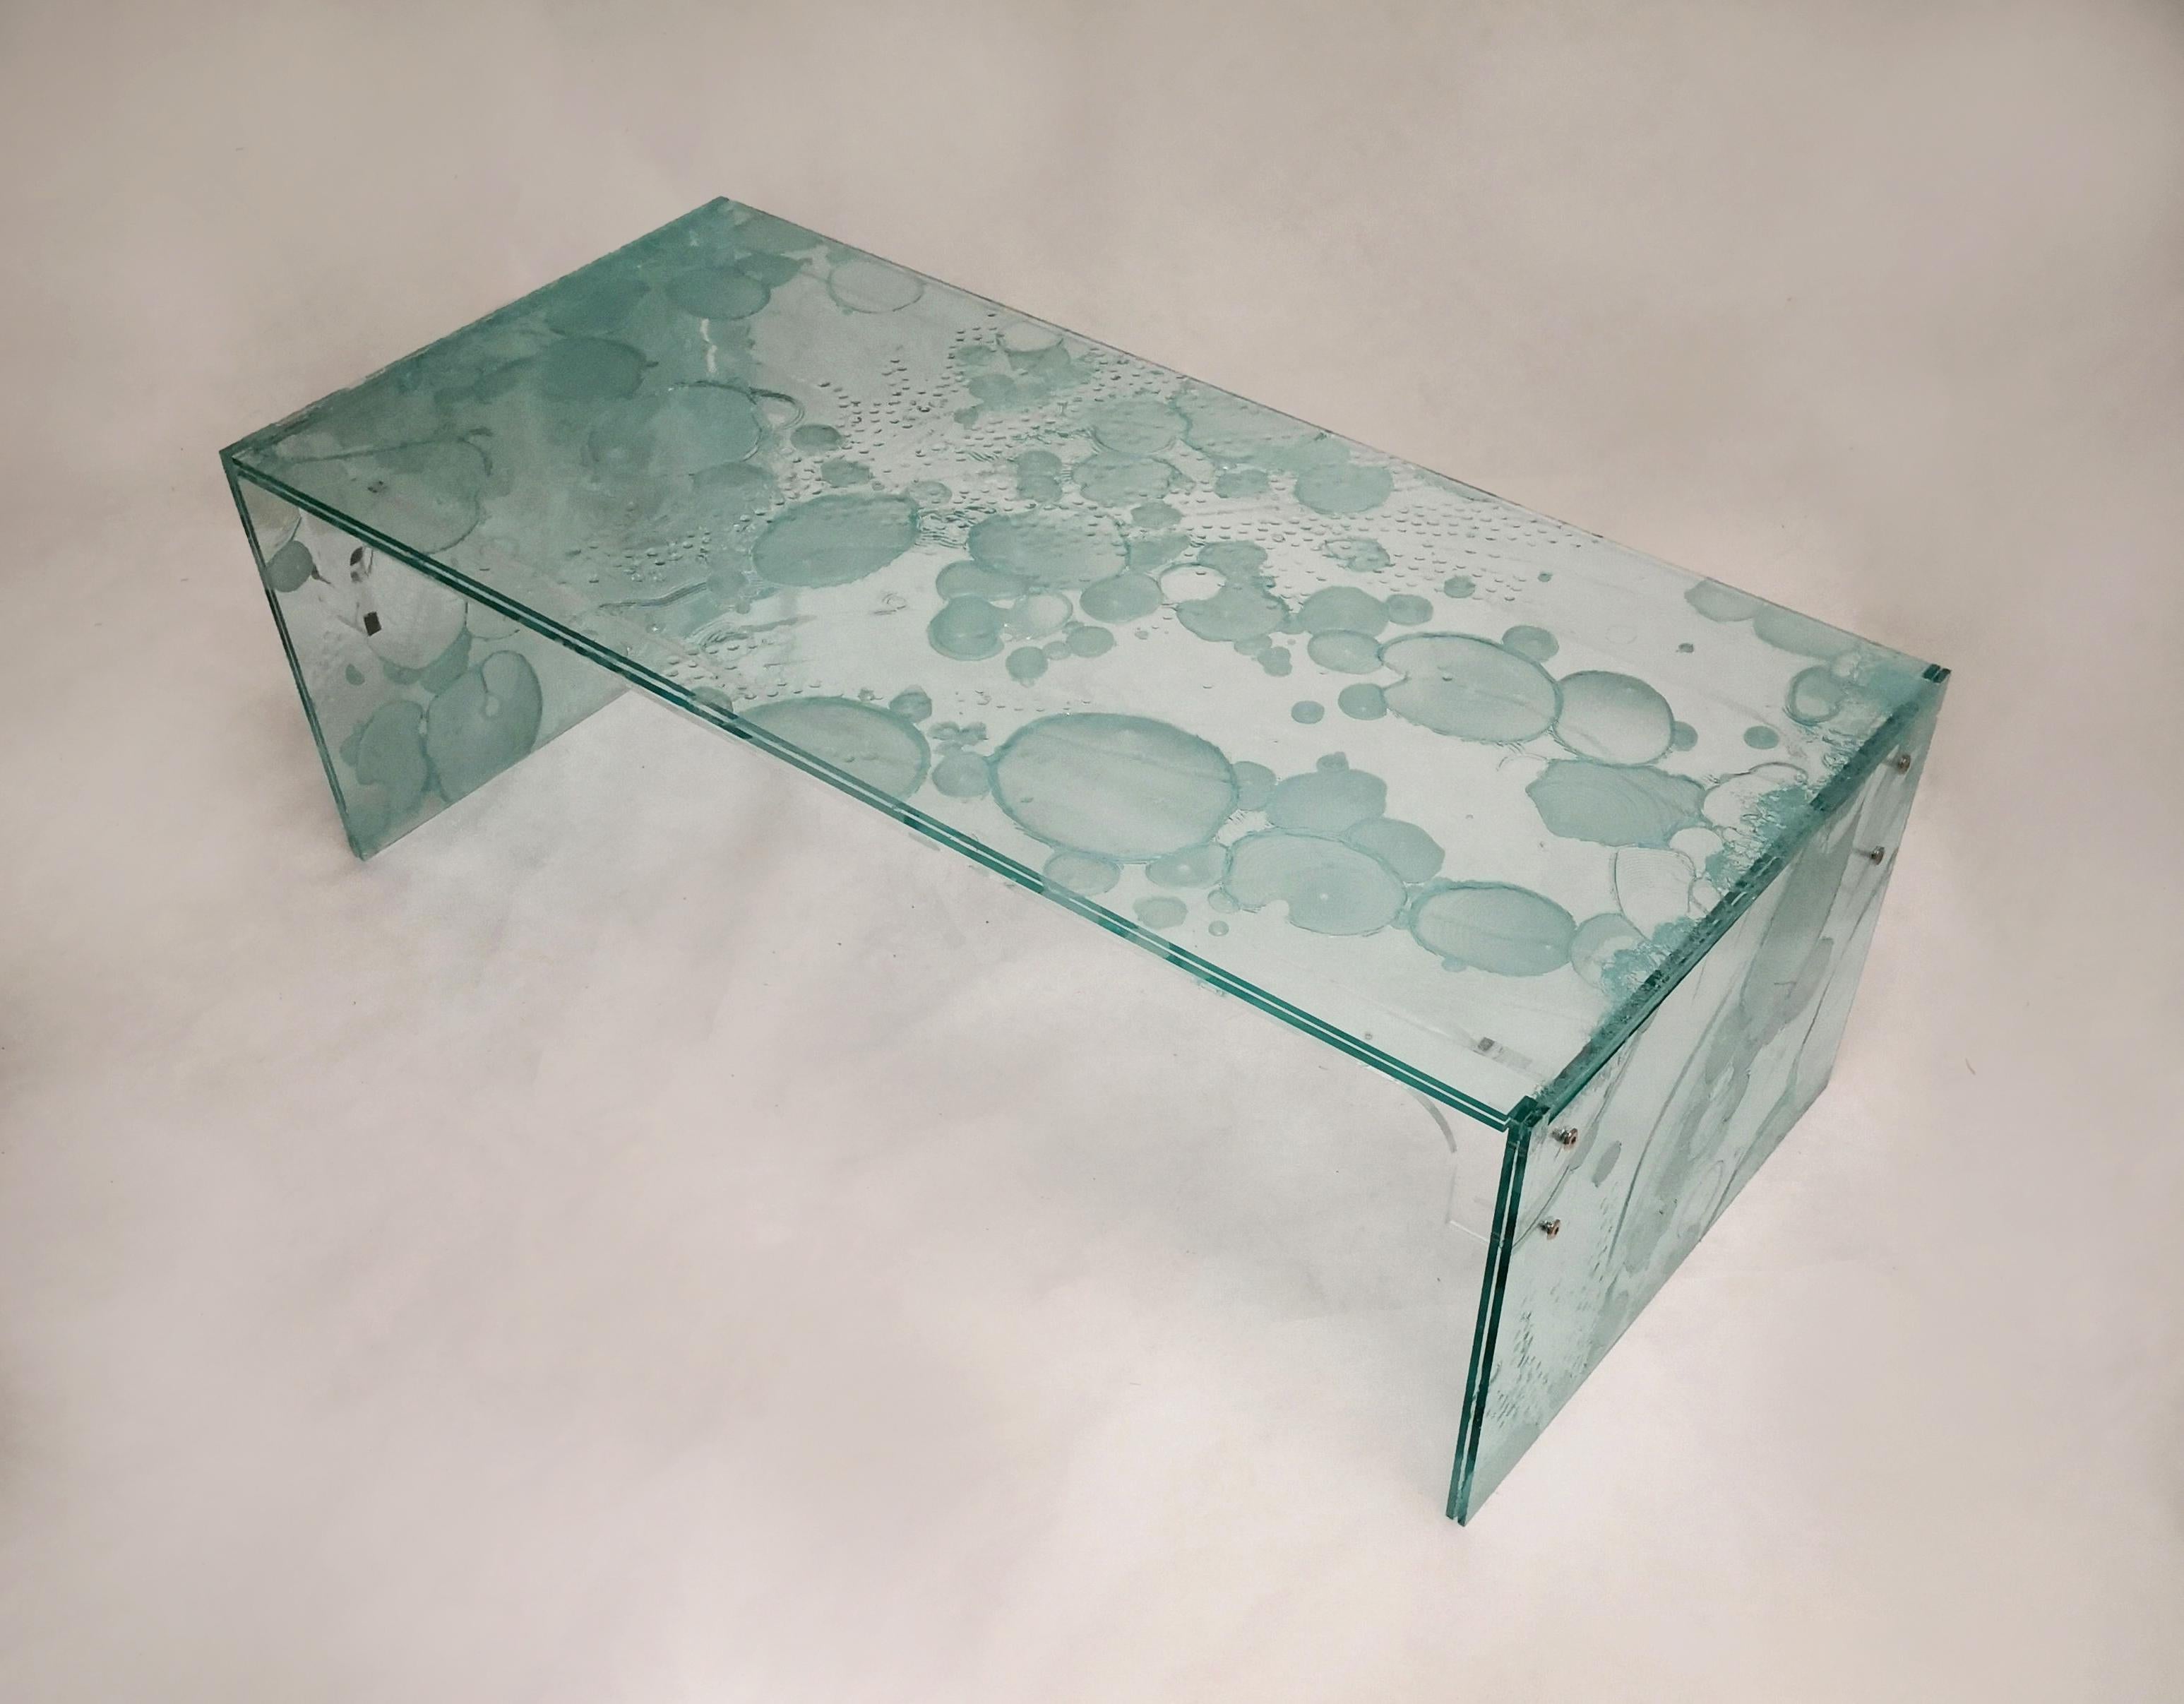 Coffee table, handmade in transparent acrylic colored with an innovative technology.
The material is made through the fusion of three plates, one of which
partially cured center.
This process creates unique and particular effects, shades
transparent